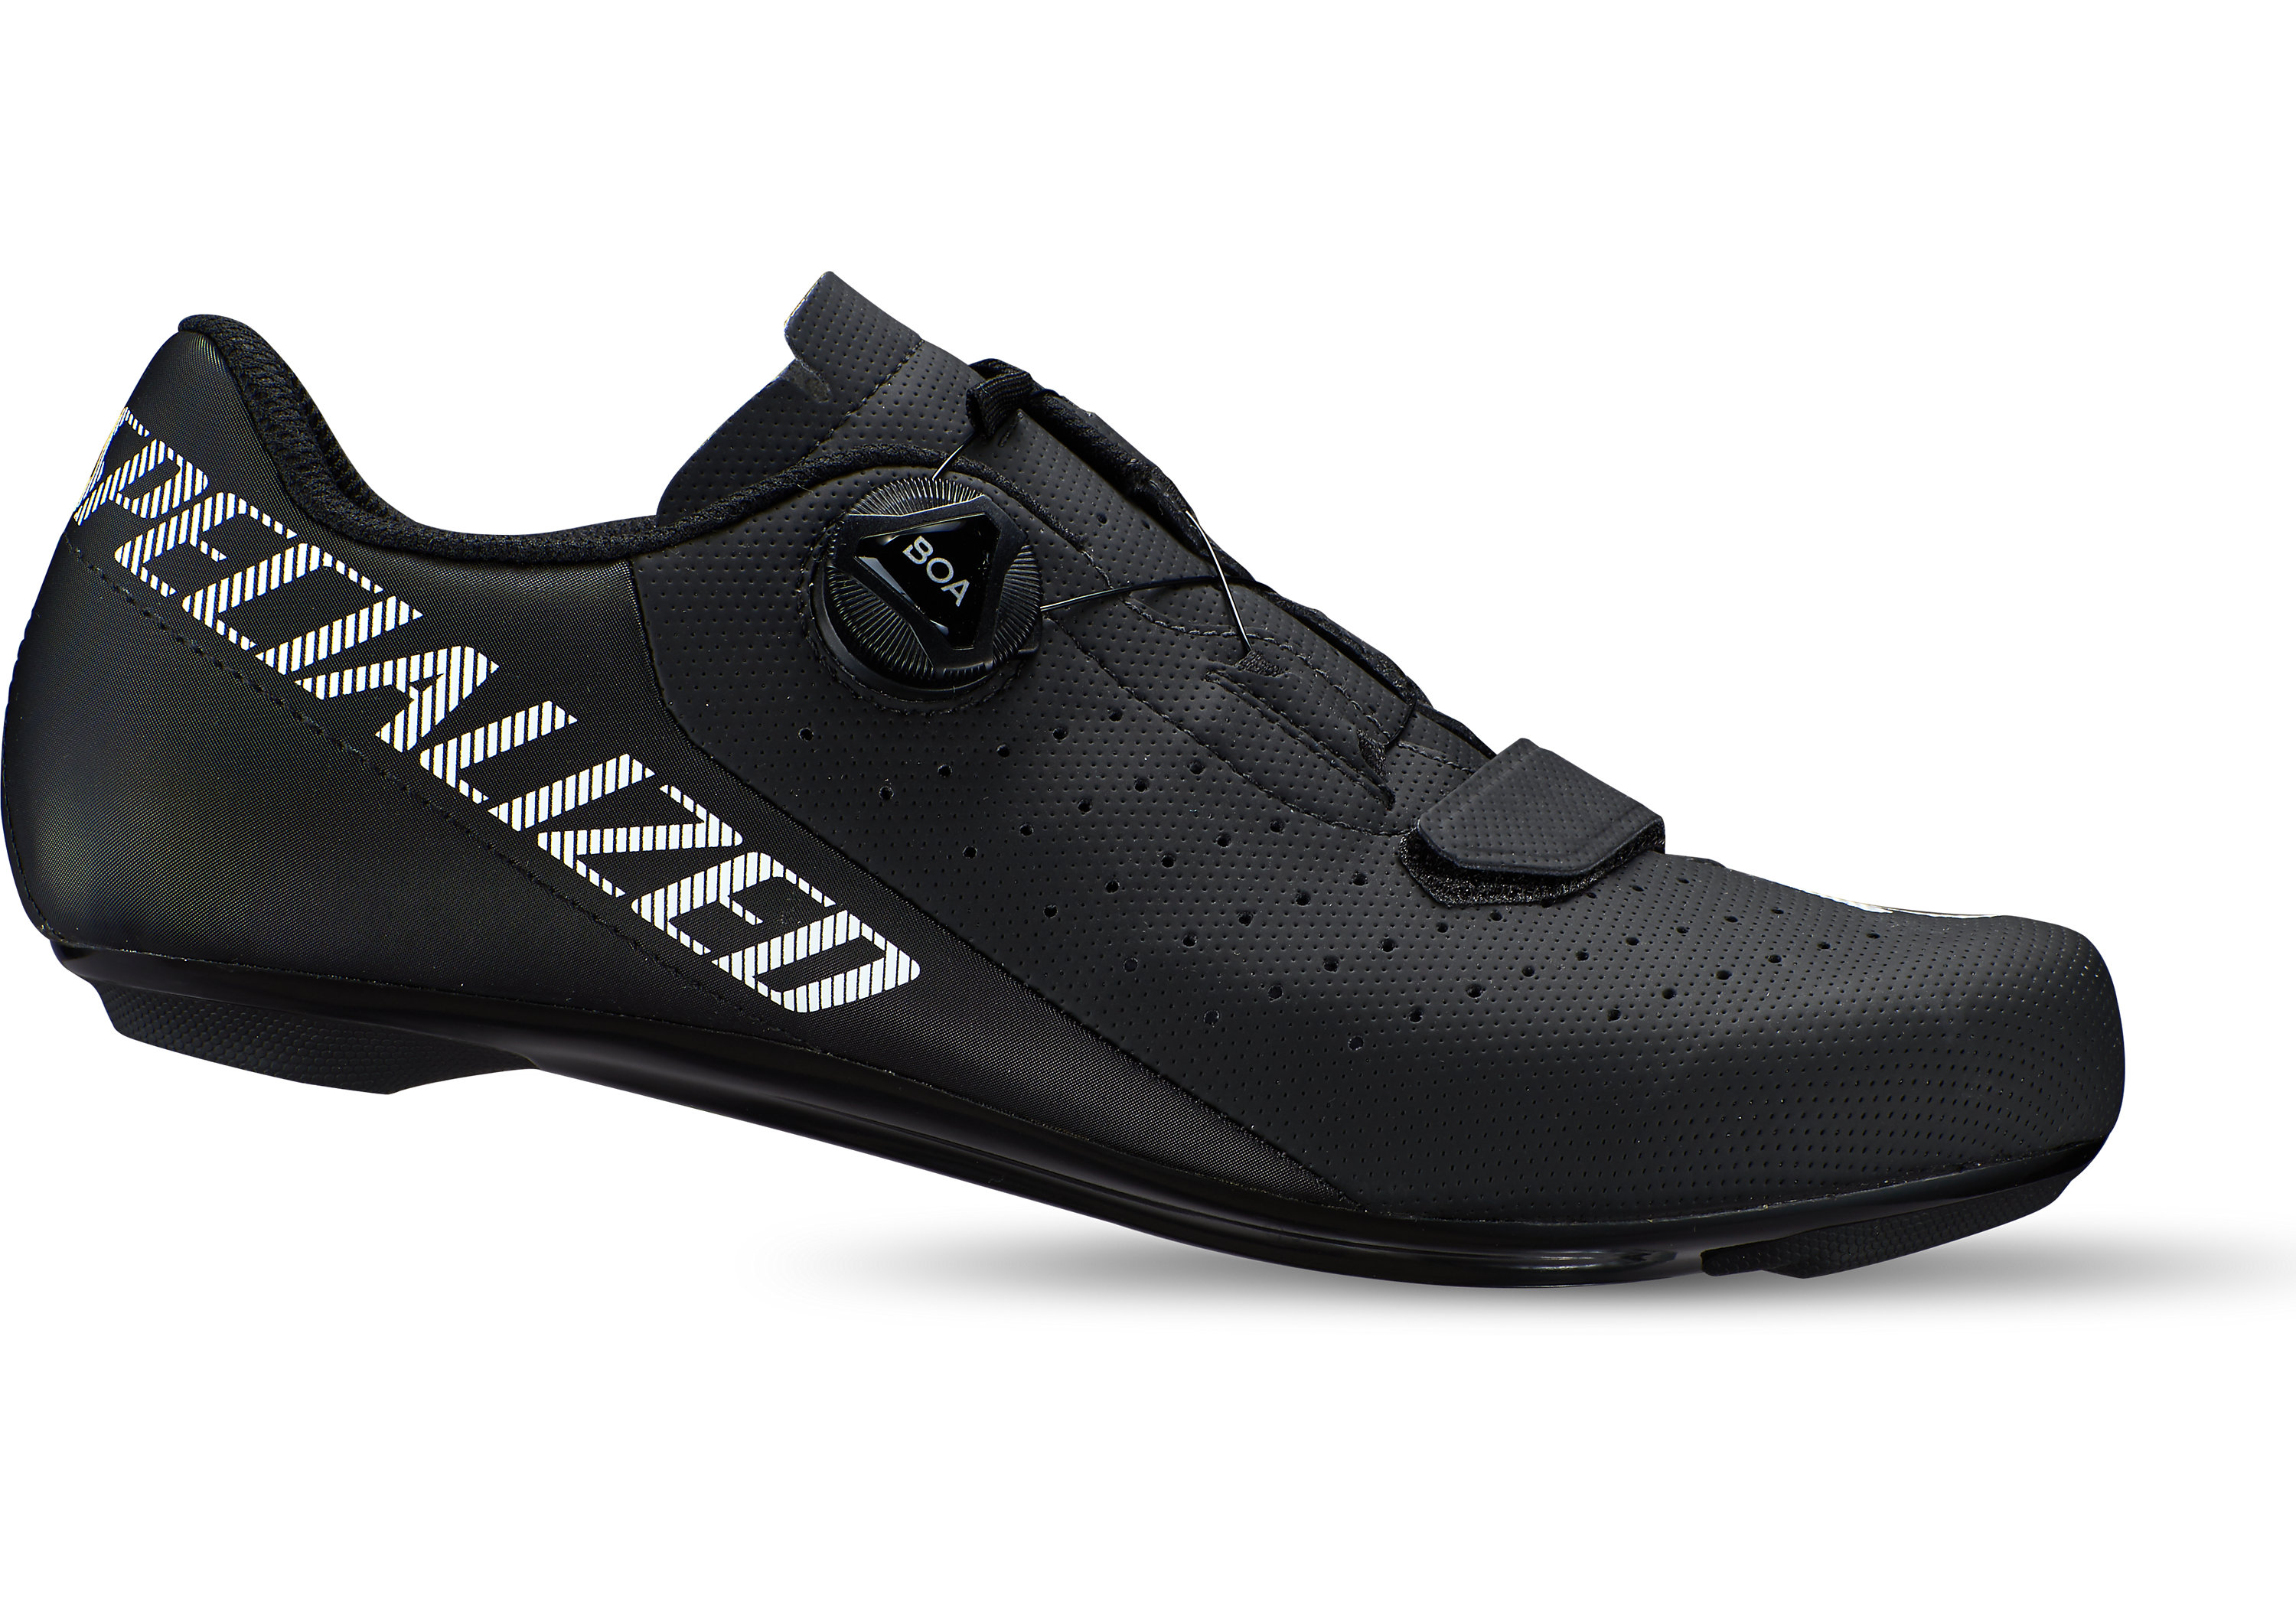 Велообувь Specialized TORCH 1.0 RD SHOE BLK 41 2020	 61020-5141